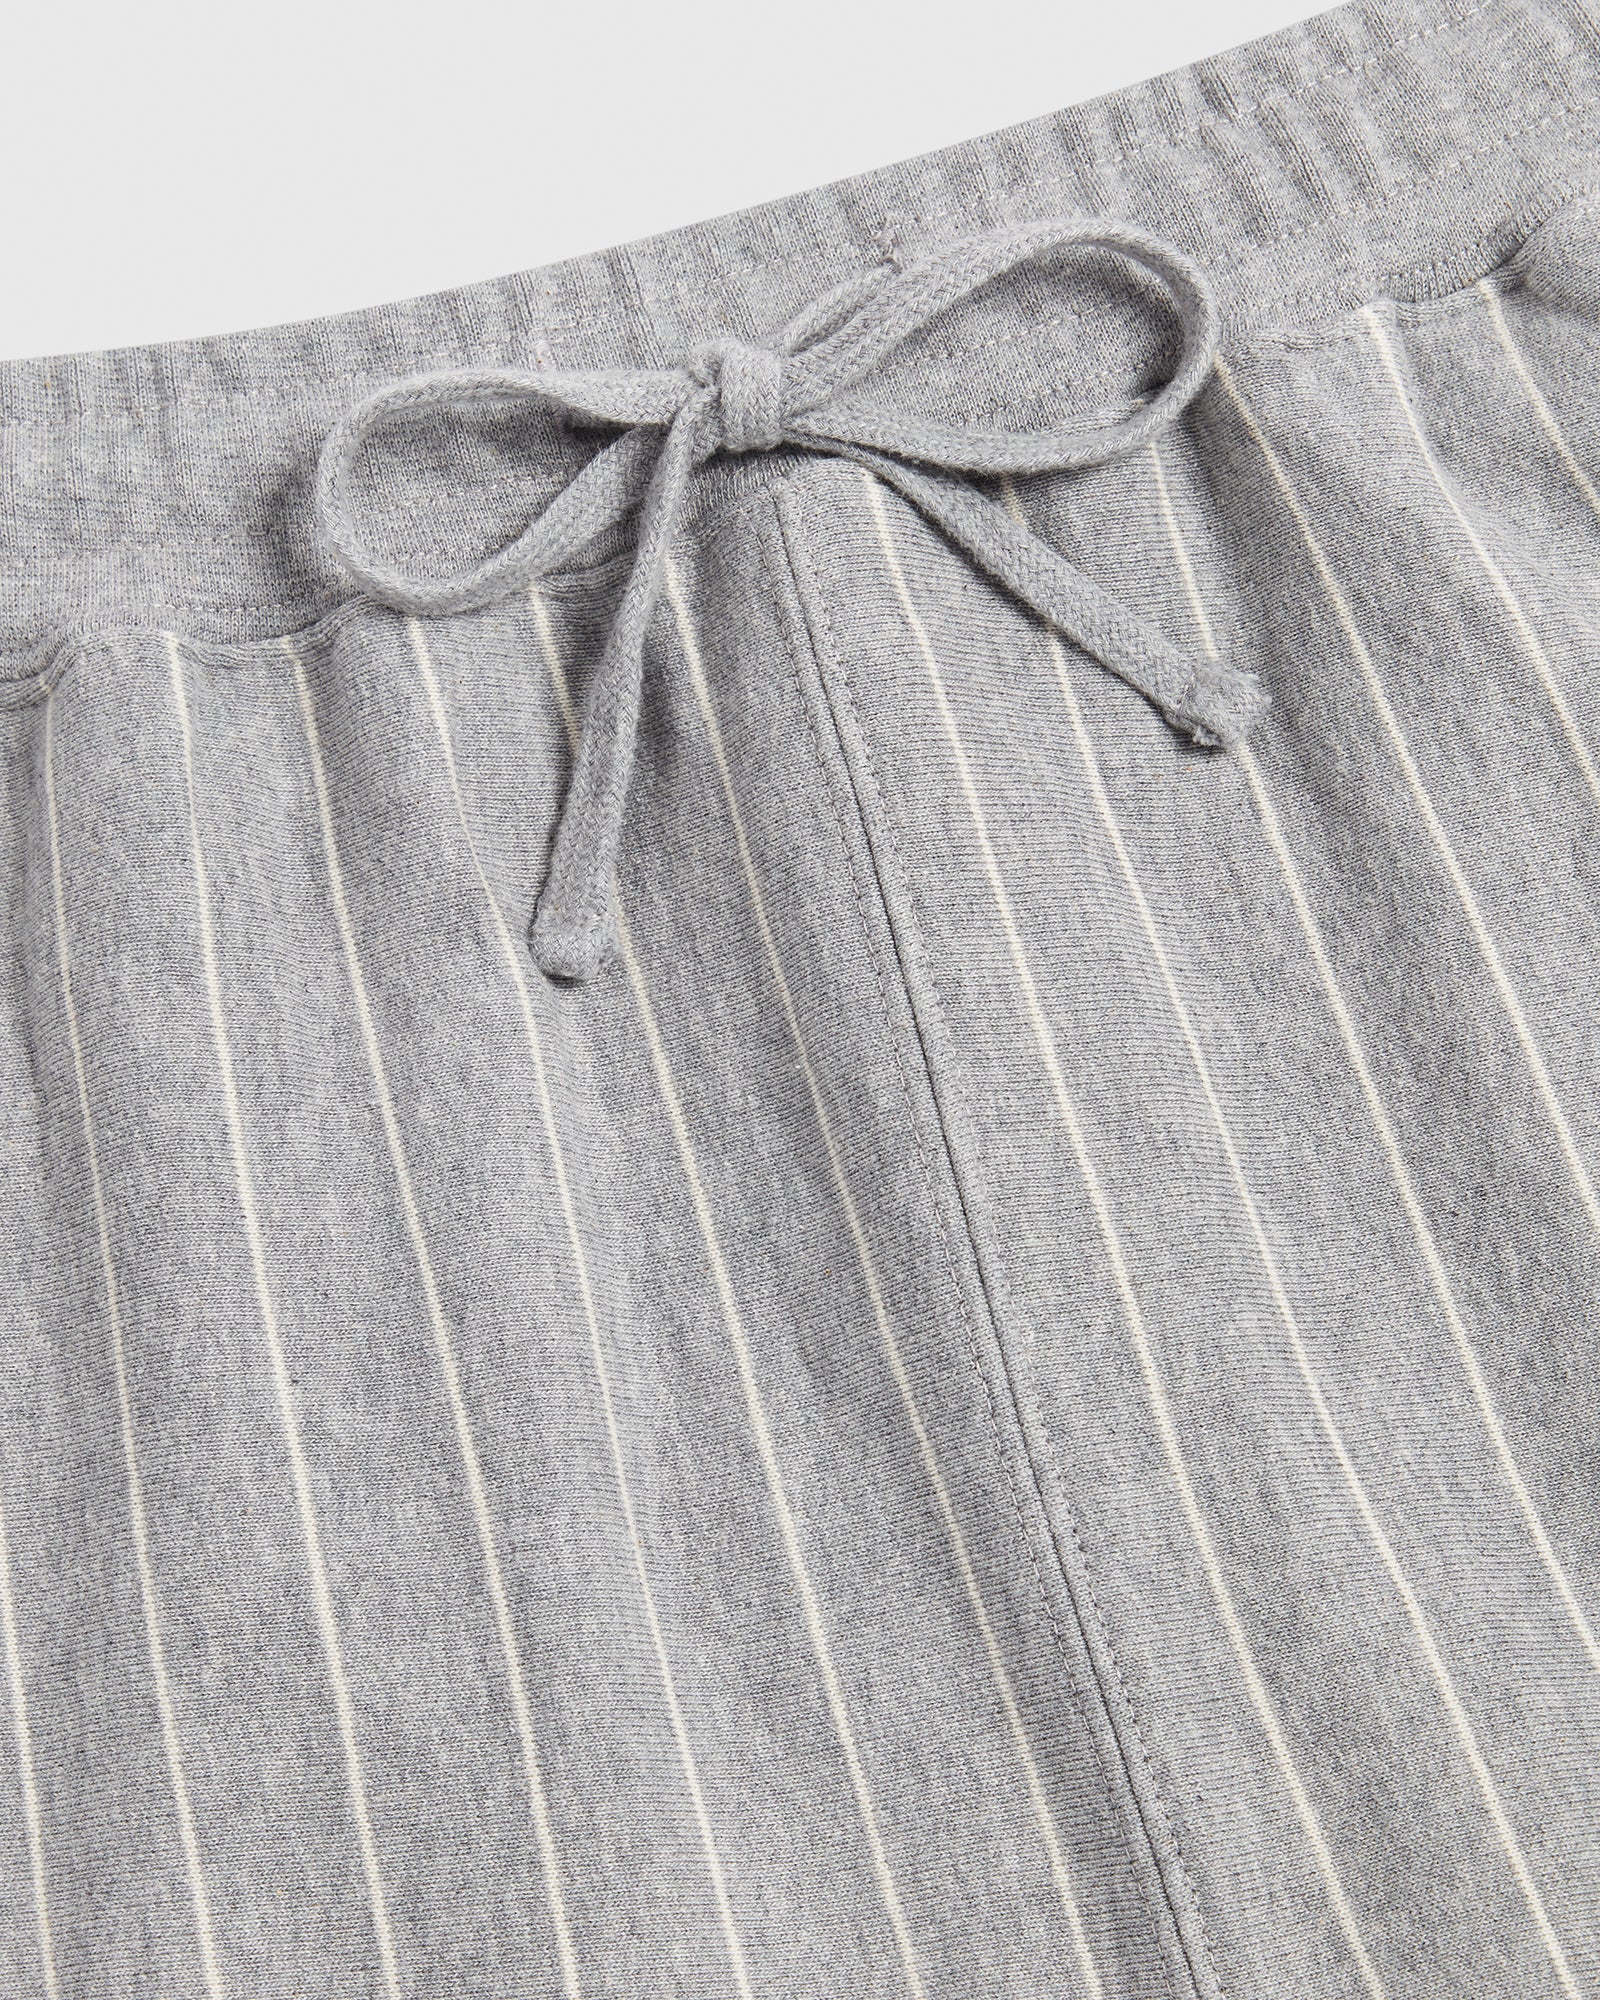 Pinstripe Relaxed Fit Sweatpant - Heather Grey / Cream